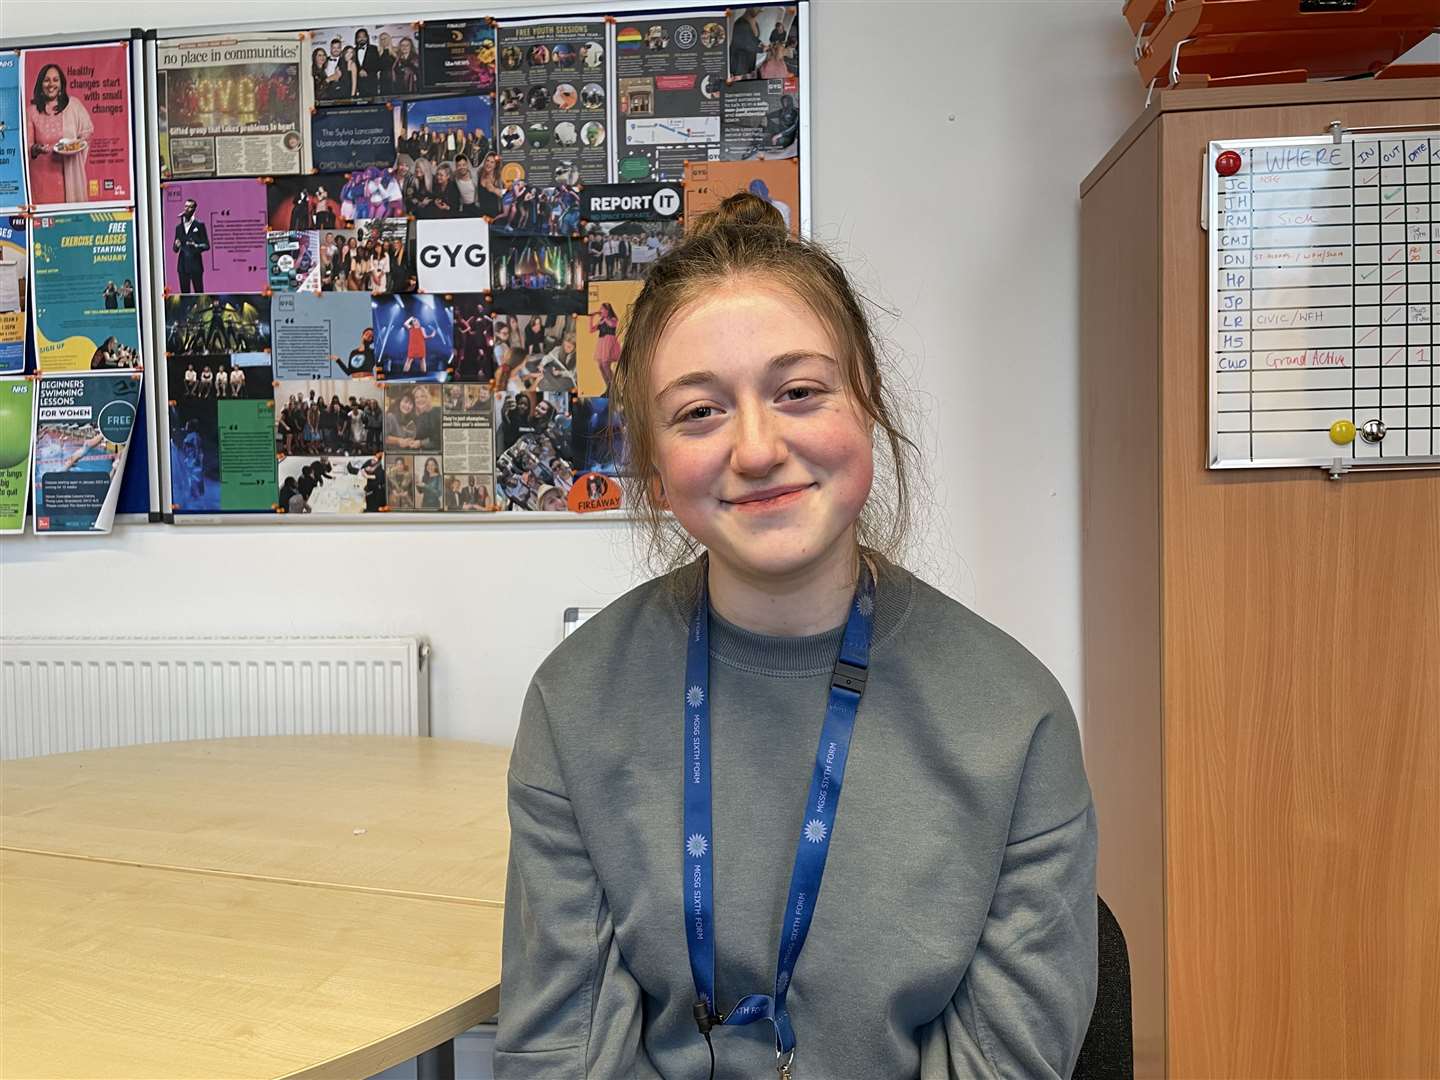 Ellie Burns is the chairman of the GYG youth committee